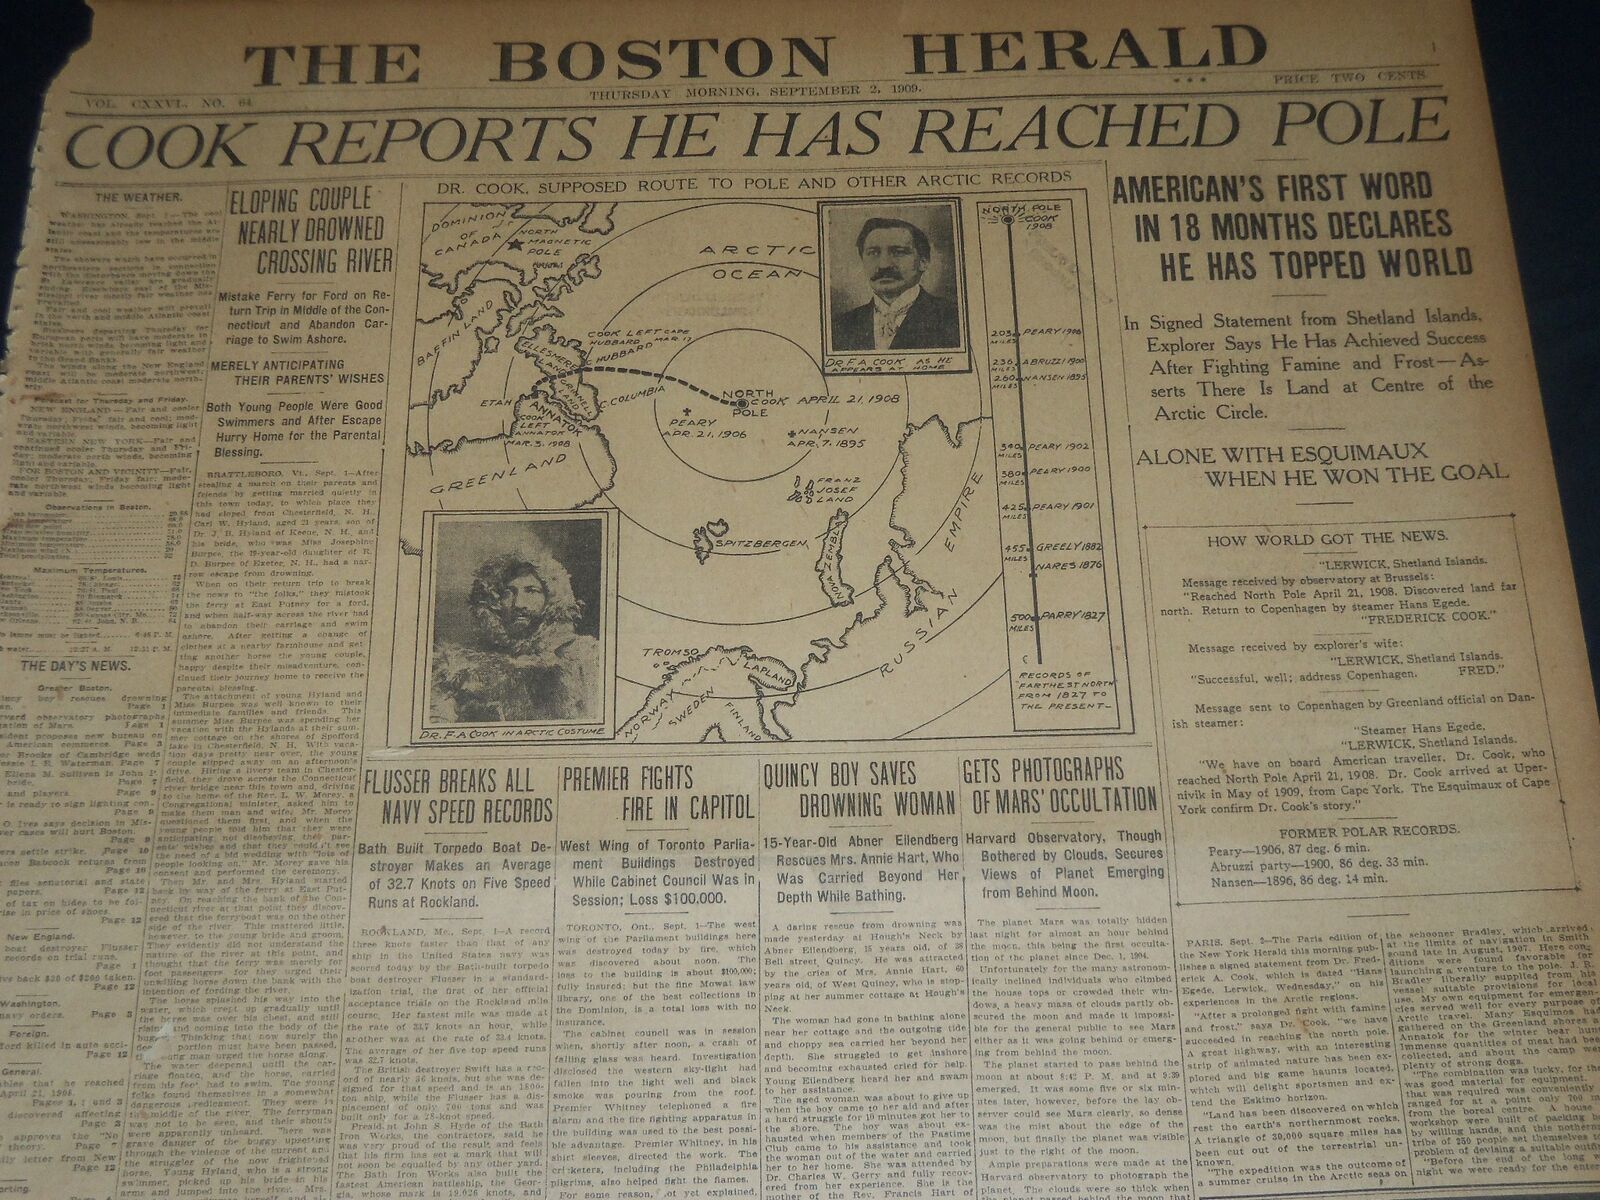 1909 SEPTEMBER 2 THE BOSTON HERALD - COOK REPORTS HE HAS REACHED POLE - BH 209